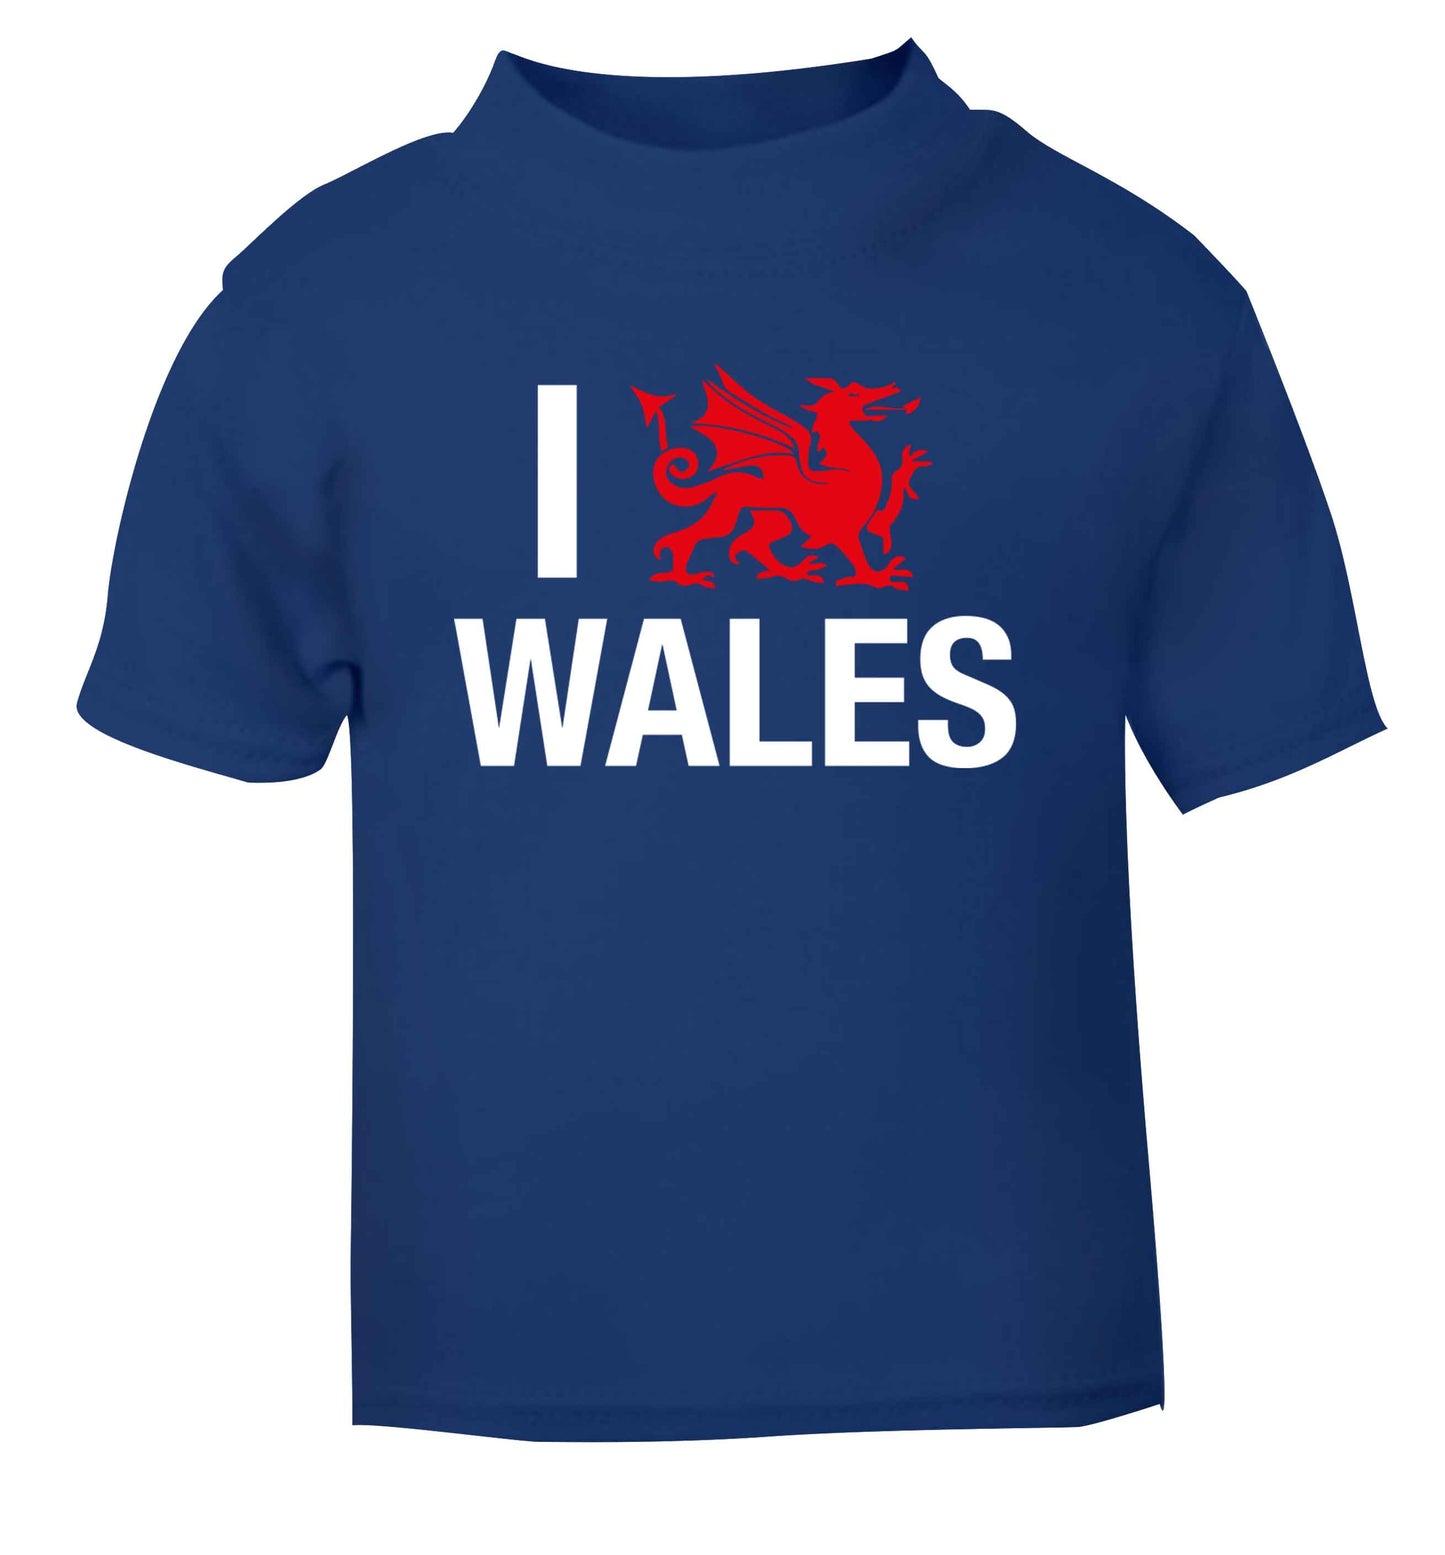 I love Wales blue Baby Toddler Tshirt 2 Years